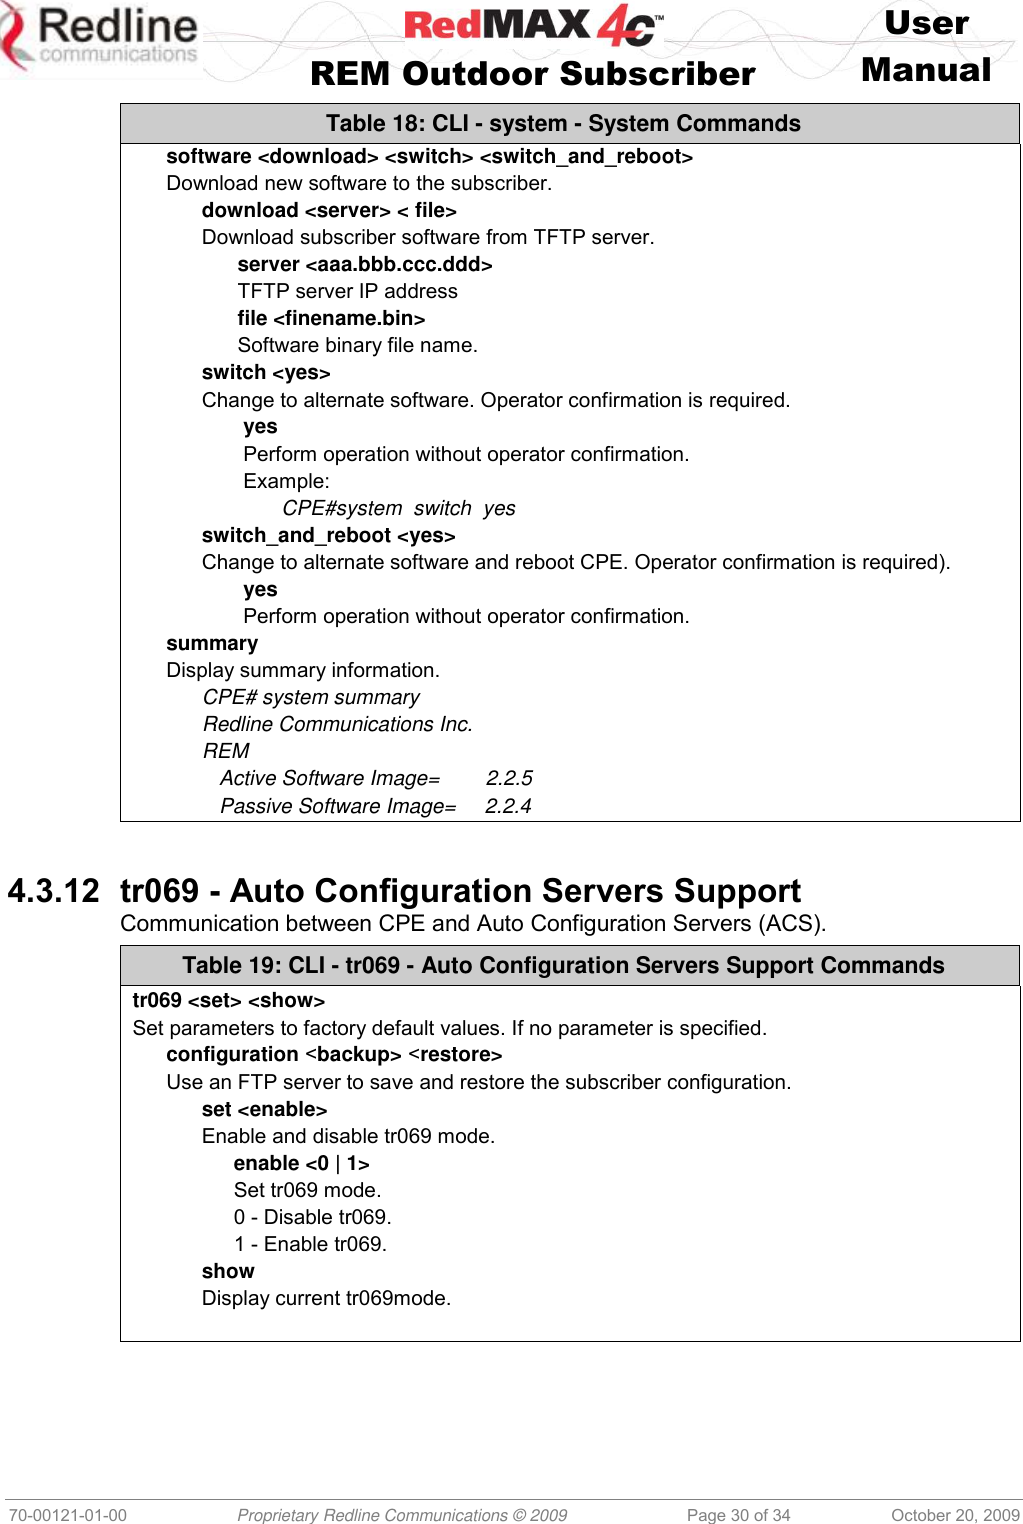    User   REM Outdoor Subscriber  Manual   70-00121-01-00 Proprietary Redline Communications © 2009 Page 30 of 34 October 20, 2009 Table 18: CLI - system - System Commands software &lt;download&gt; &lt;switch&gt; &lt;switch_and_reboot&gt; Download new software to the subscriber. download &lt;server&gt; &lt; file&gt; Download subscriber software from TFTP server. server &lt;aaa.bbb.ccc.ddd&gt; TFTP server IP address file &lt;finename.bin&gt;  Software binary file name. switch &lt;yes&gt; Change to alternate software. Operator confirmation is required. yes Perform operation without operator confirmation. Example:  CPE#system  switch  yes switch_and_reboot &lt;yes&gt; Change to alternate software and reboot CPE. Operator confirmation is required). yes Perform operation without operator confirmation. summary Display summary information. CPE# system summary Redline Communications Inc. REM    Active Software Image=        2.2.5    Passive Software Image=     2.2.4   4.3.12 tr069 - Auto Configuration Servers Support Communication between CPE and Auto Configuration Servers (ACS). Table 19: CLI - tr069 - Auto Configuration Servers Support Commands tr069 &lt;set&gt; &lt;show&gt; Set parameters to factory default values. If no parameter is specified. configuration &lt;backup&gt; &lt;restore&gt; Use an FTP server to save and restore the subscriber configuration. set &lt;enable&gt; Enable and disable tr069 mode. enable &lt;0 | 1&gt; Set tr069 mode. 0 - Disable tr069. 1 - Enable tr069. show Display current tr069mode.   